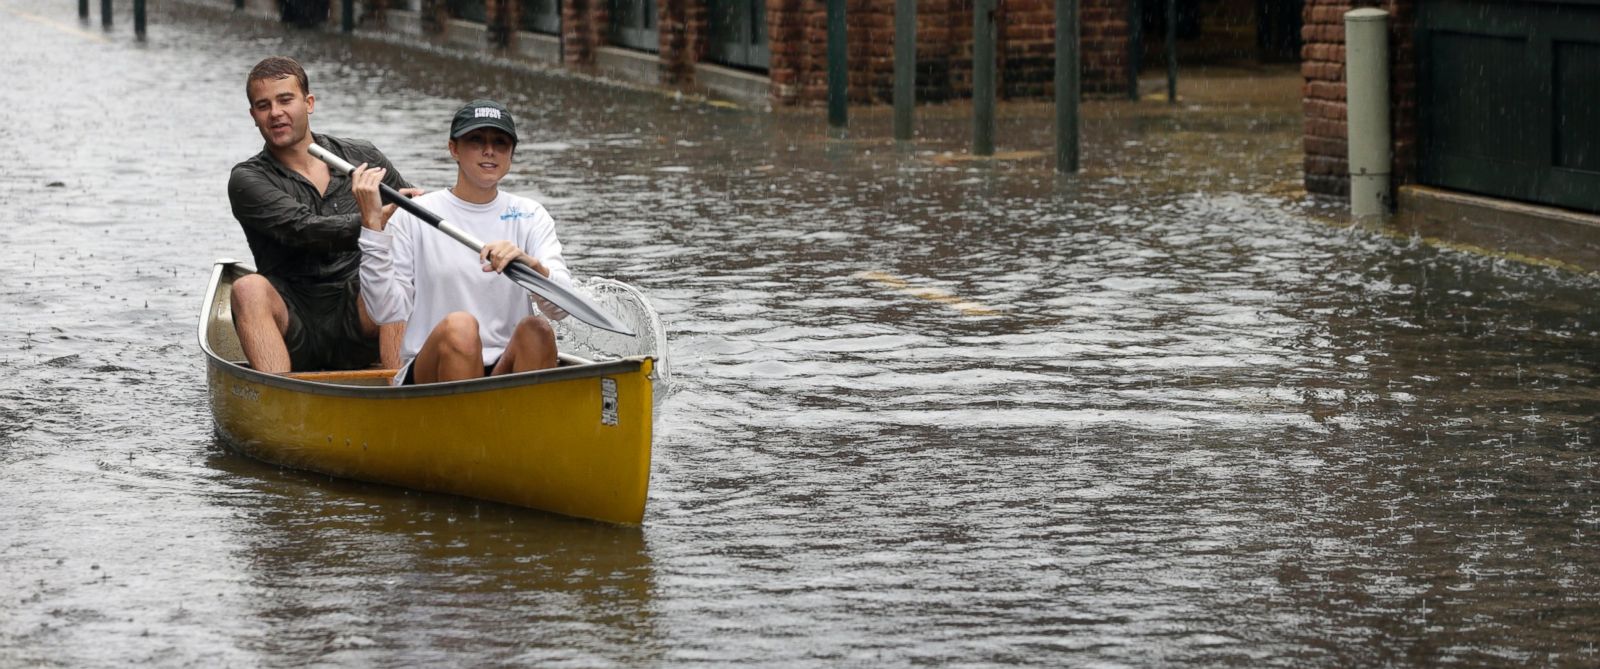 PHOTO: Dillon Christ, front, and Kyle Barnell paddle their canoe down a flooded street in Charleston, S.C., Saturday, Oct. 3, 2015.